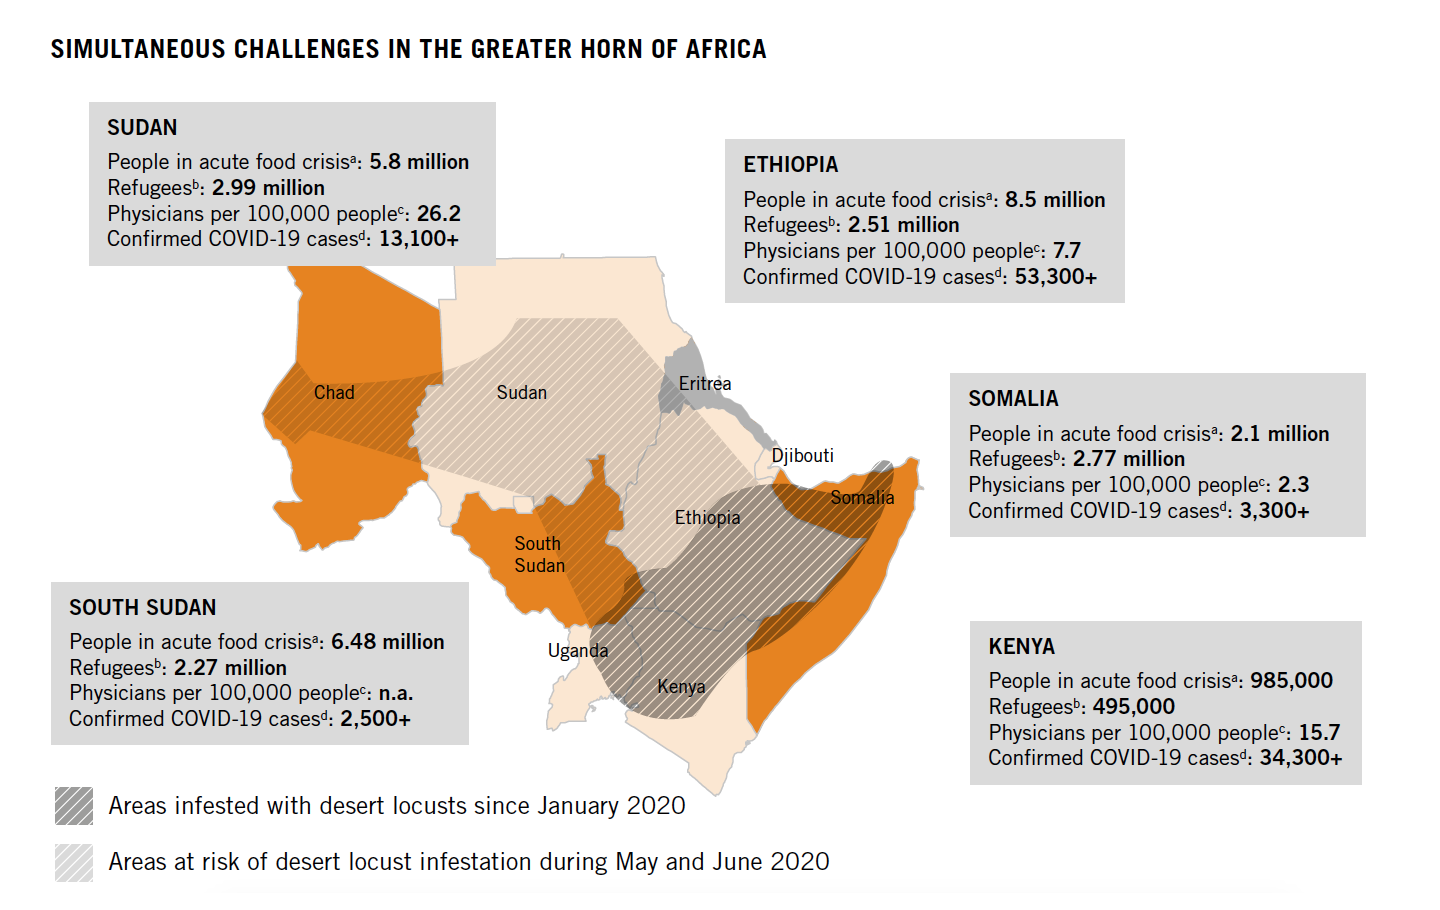 Simultaneous Challenges in the Greater Horn of Africa